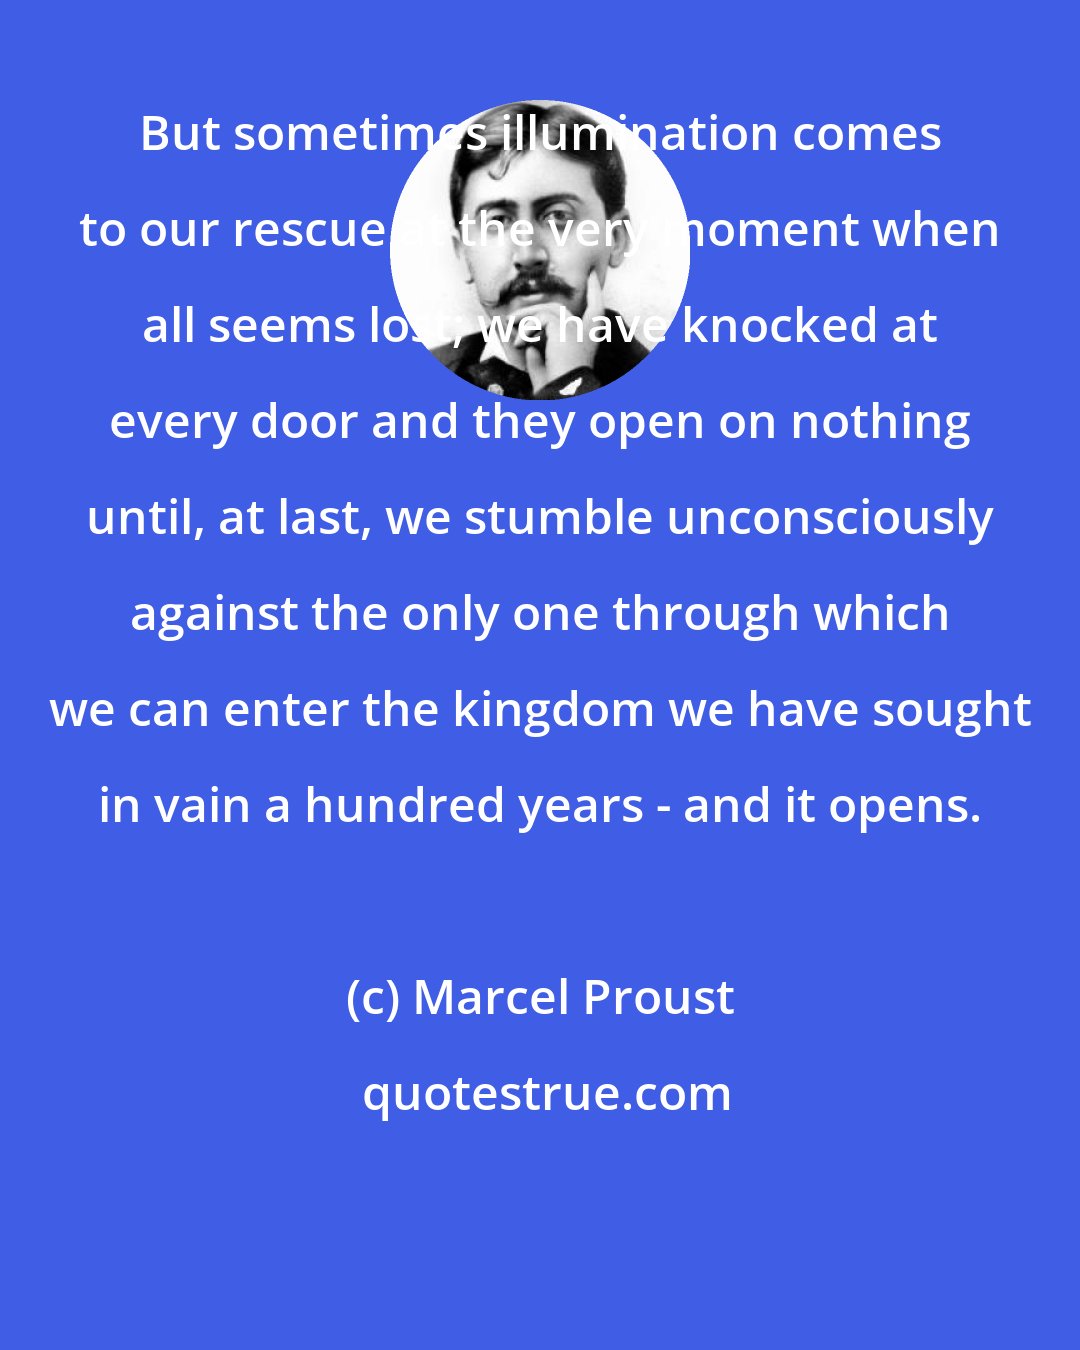 Marcel Proust: But sometimes illumination comes to our rescue at the very moment when all seems lost; we have knocked at every door and they open on nothing until, at last, we stumble unconsciously against the only one through which we can enter the kingdom we have sought in vain a hundred years - and it opens.